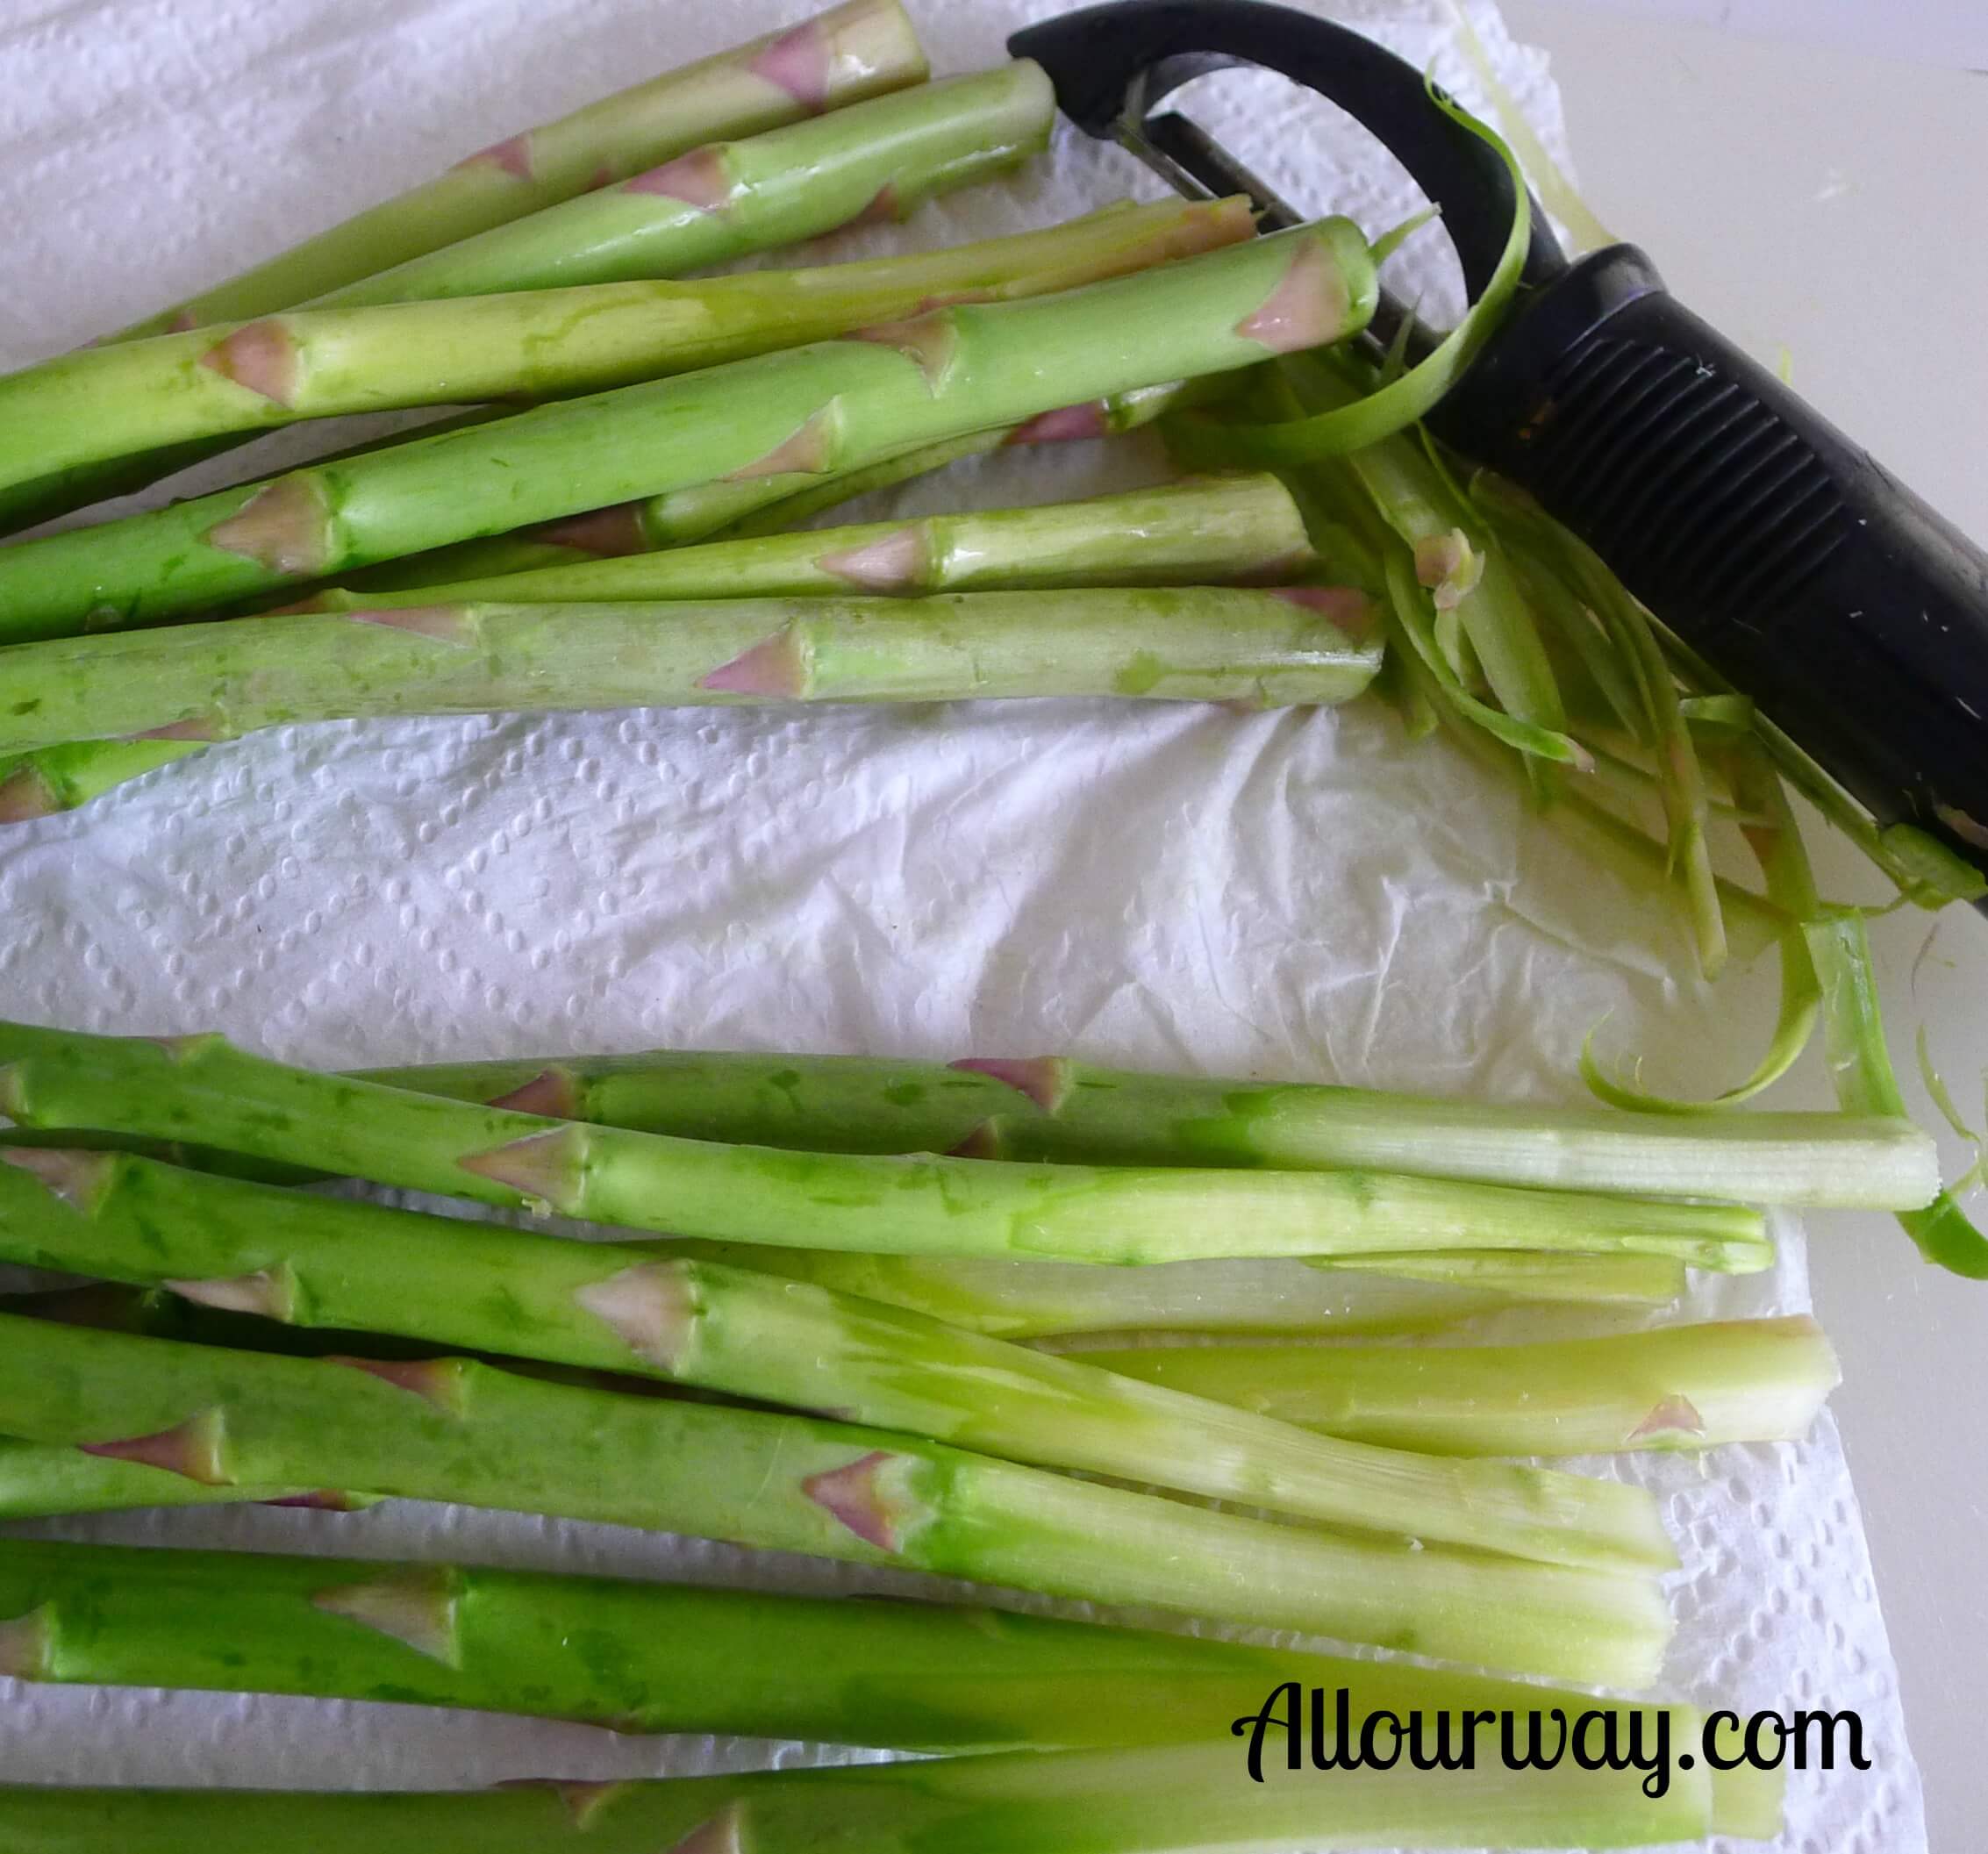 For Roasted asparagus first peel ends @allourway.com